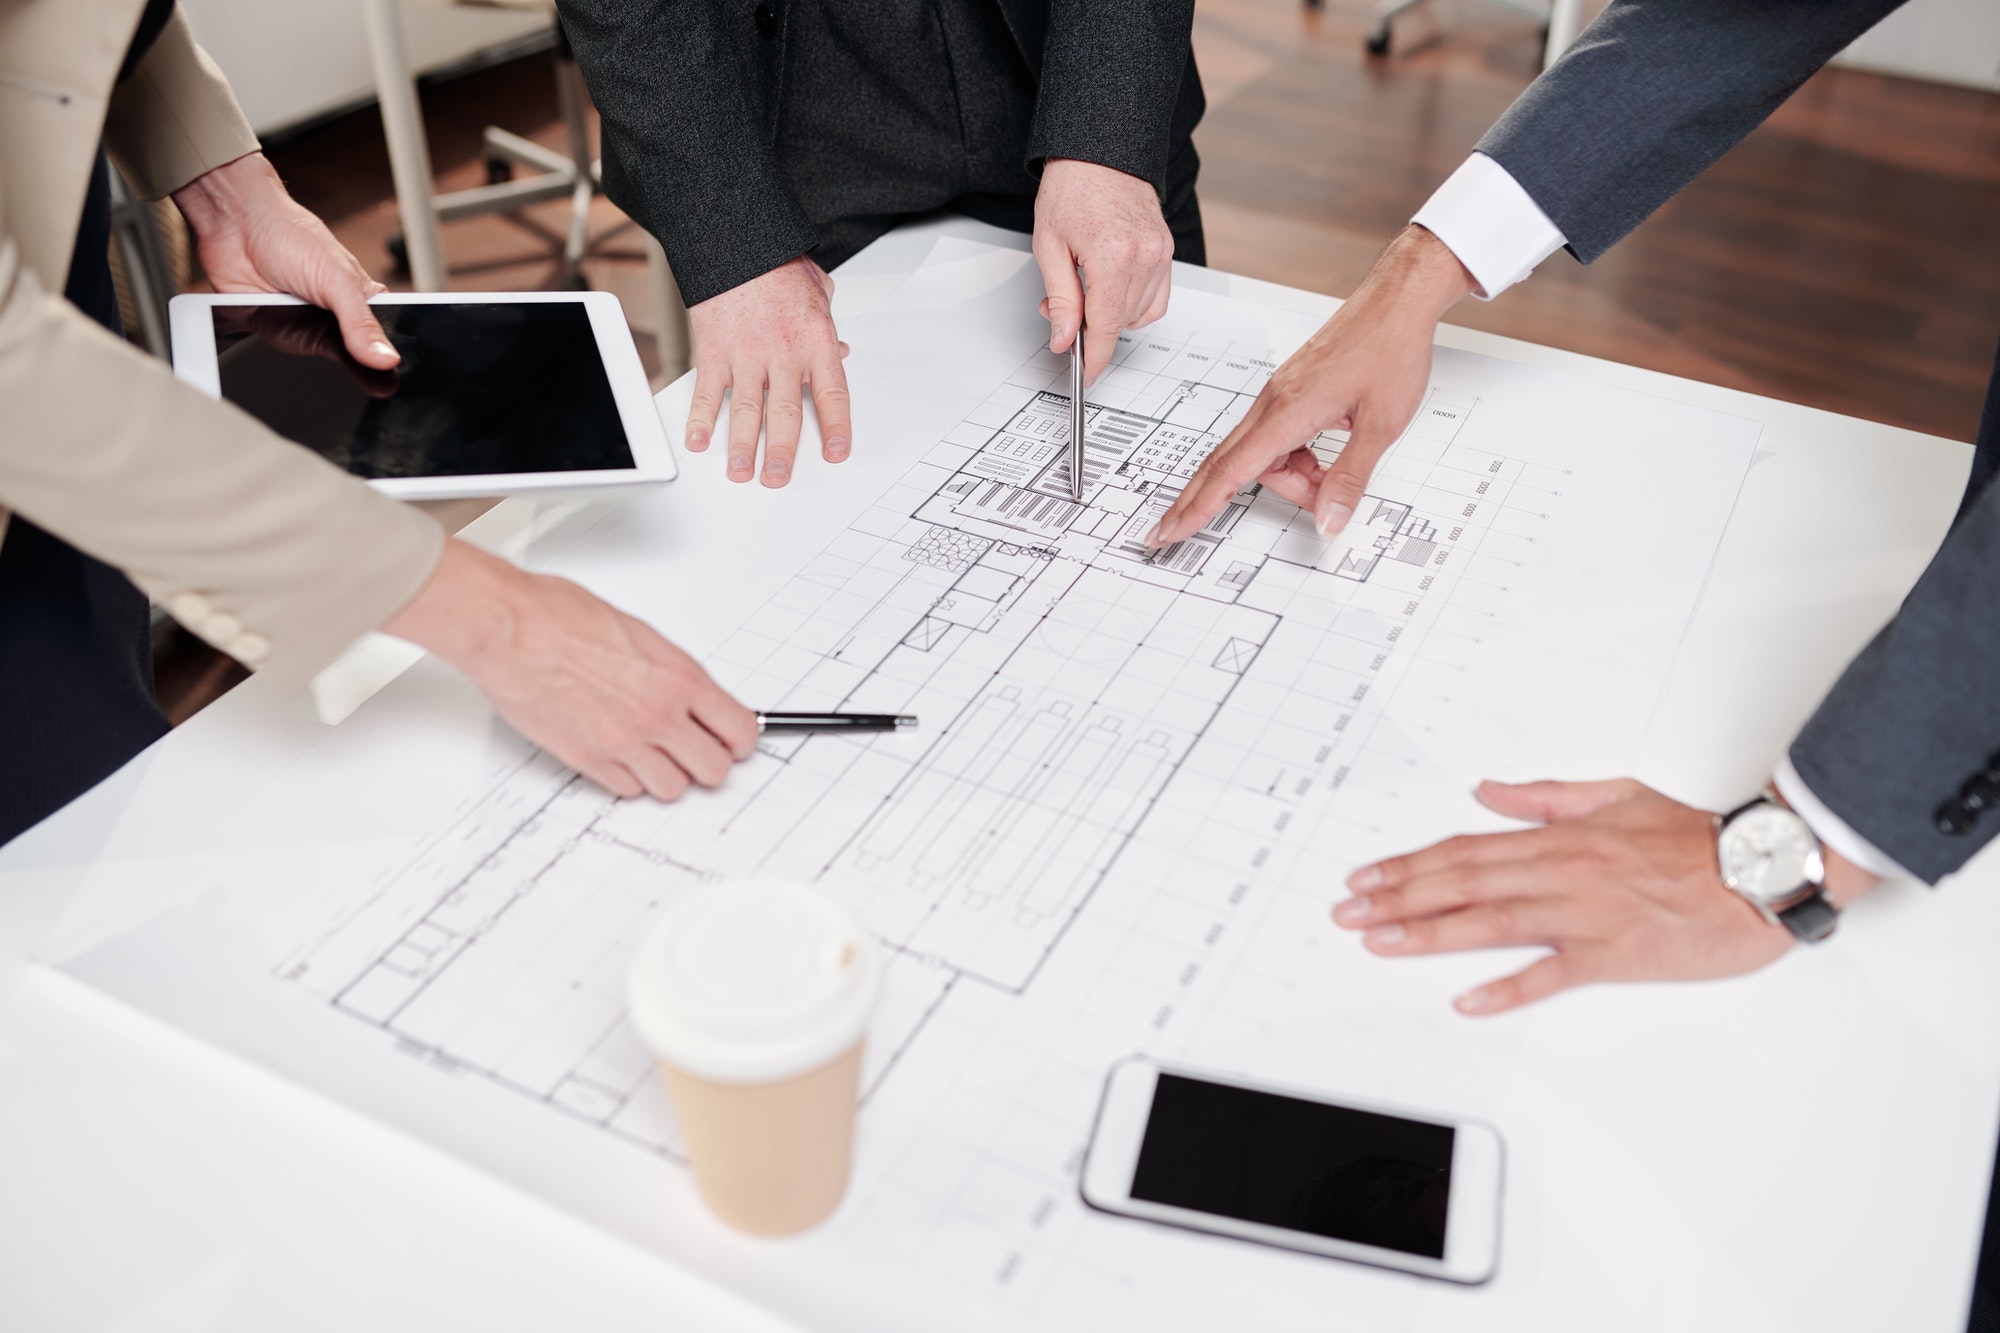 team-of-business-people-discussing-construction-plans.jpg